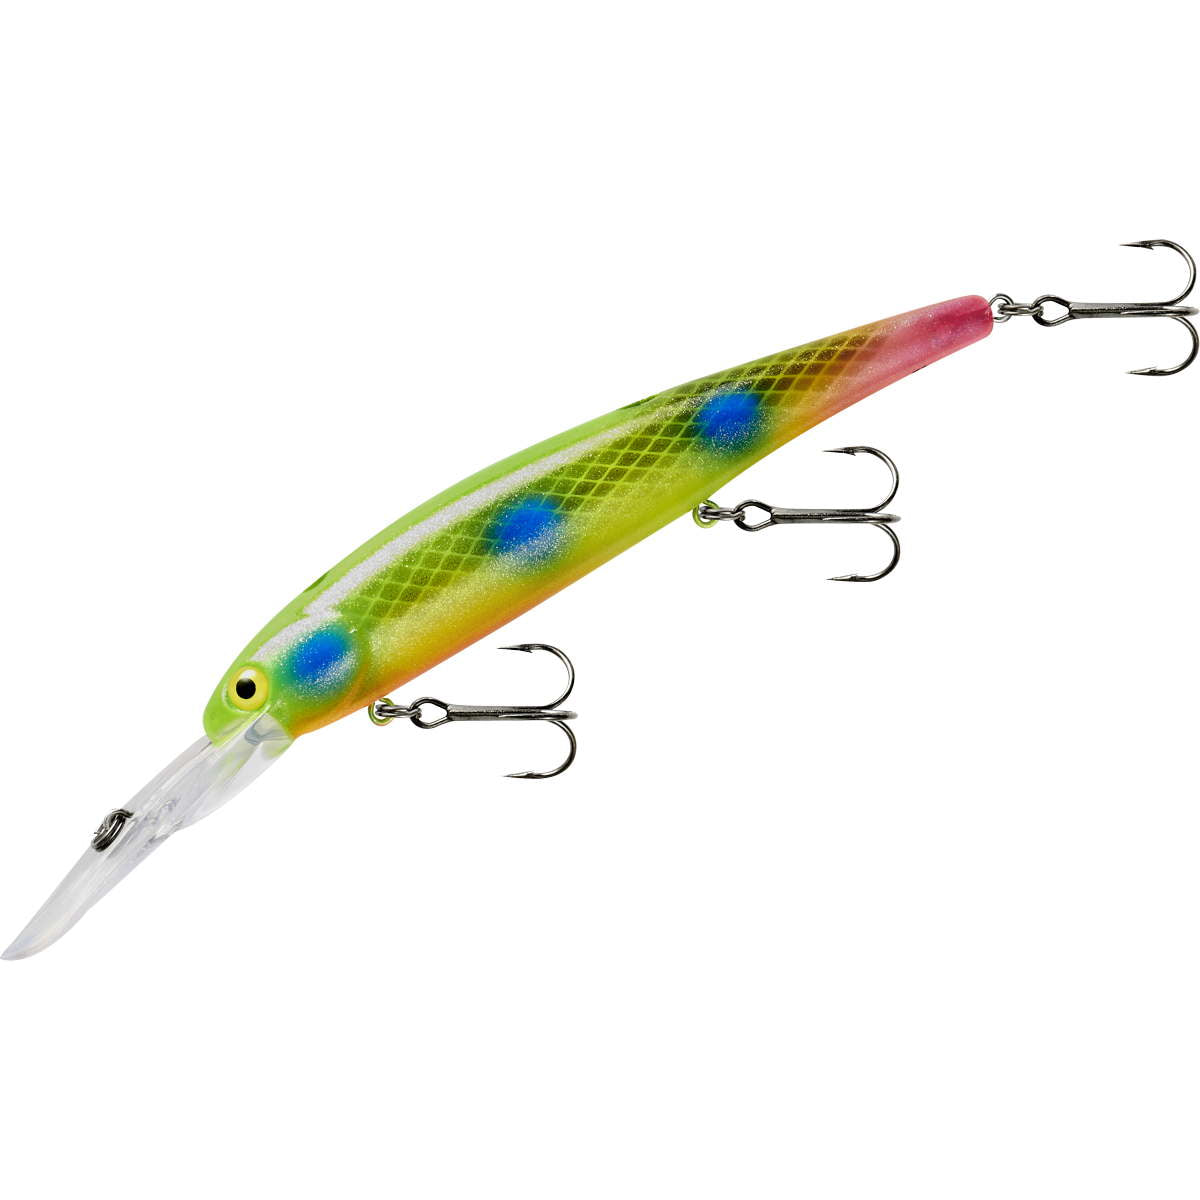 Photo of Bandit Lures Generator for sale at United Tackle Shops.